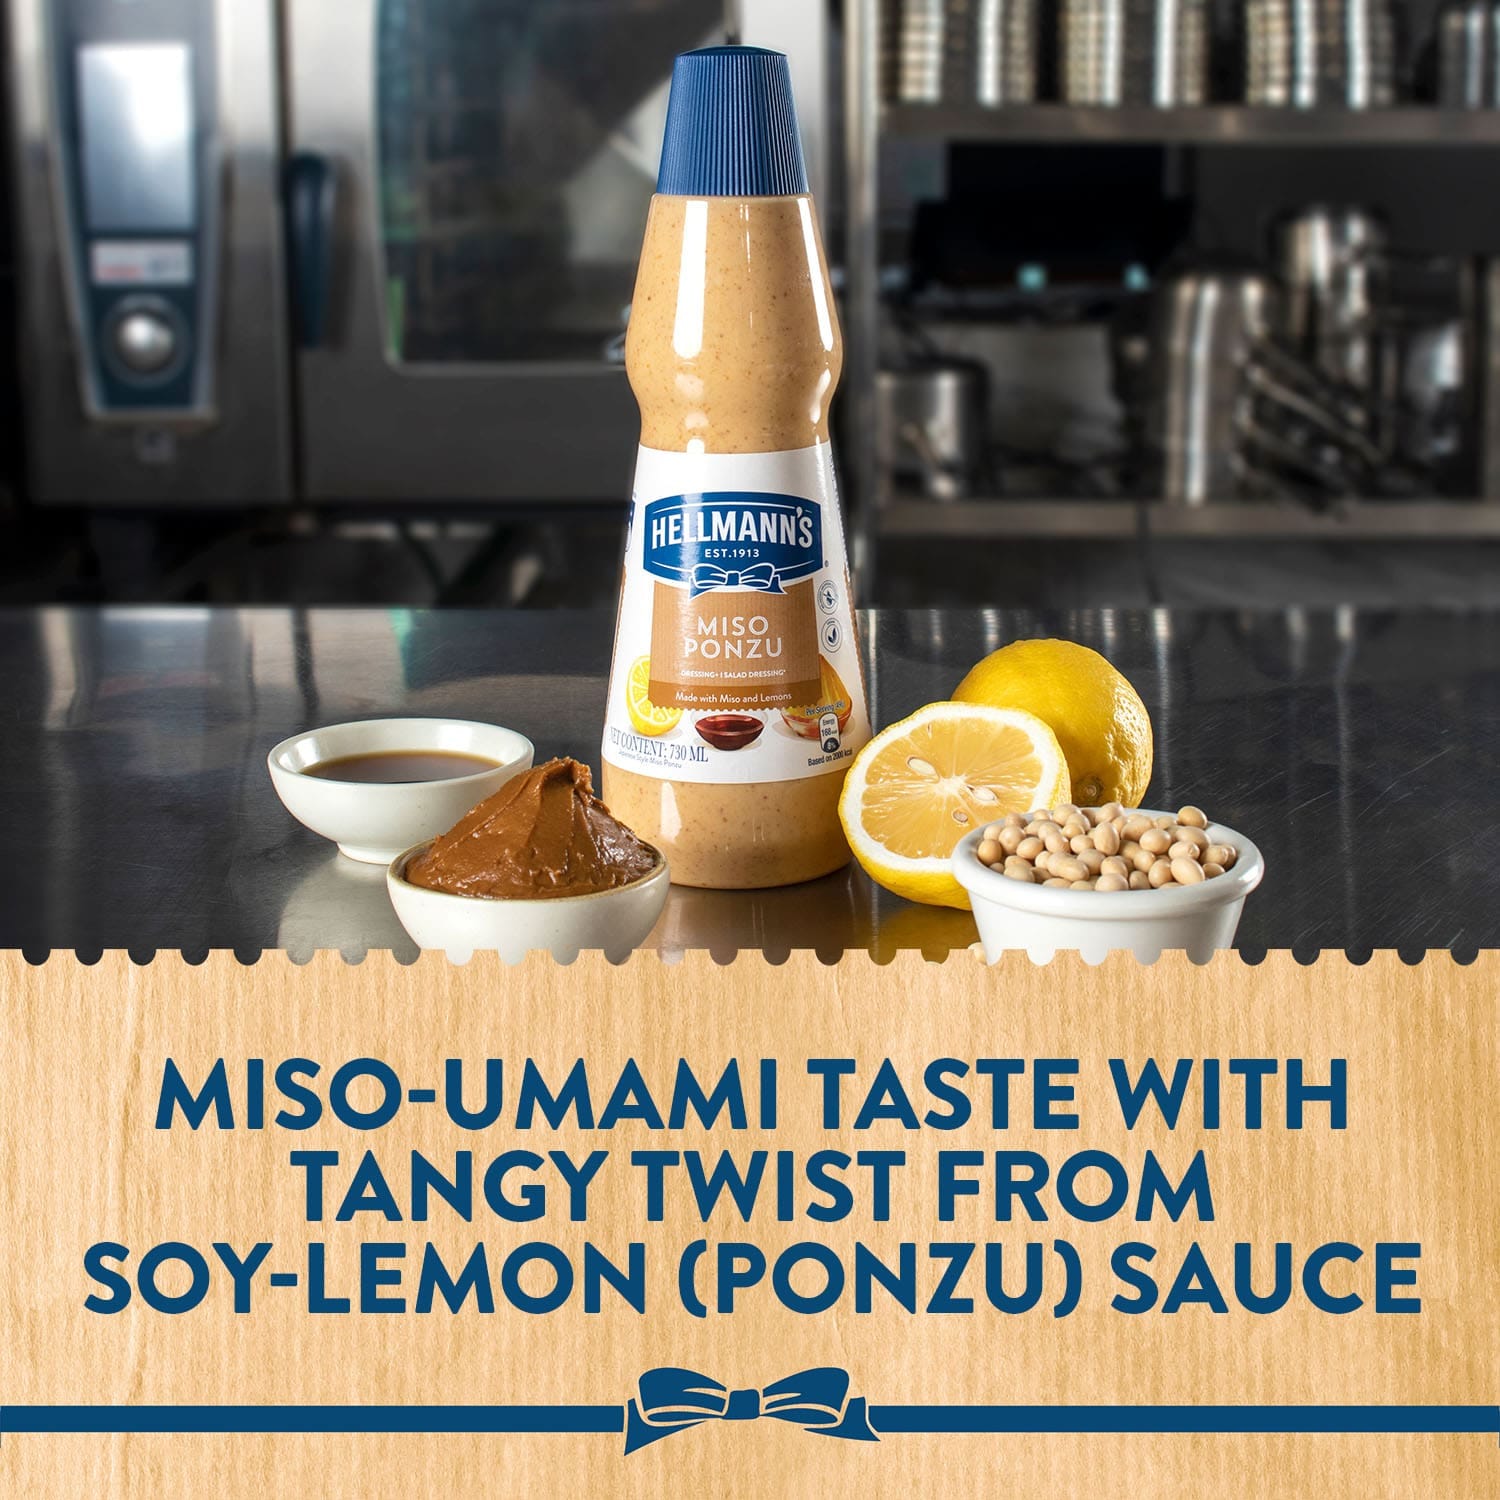 Hellmann's Miso Ponzu Dressing 730ml - With Hellmann's Dressings, I can create unique flavours for exciting dishes that my diners will love!